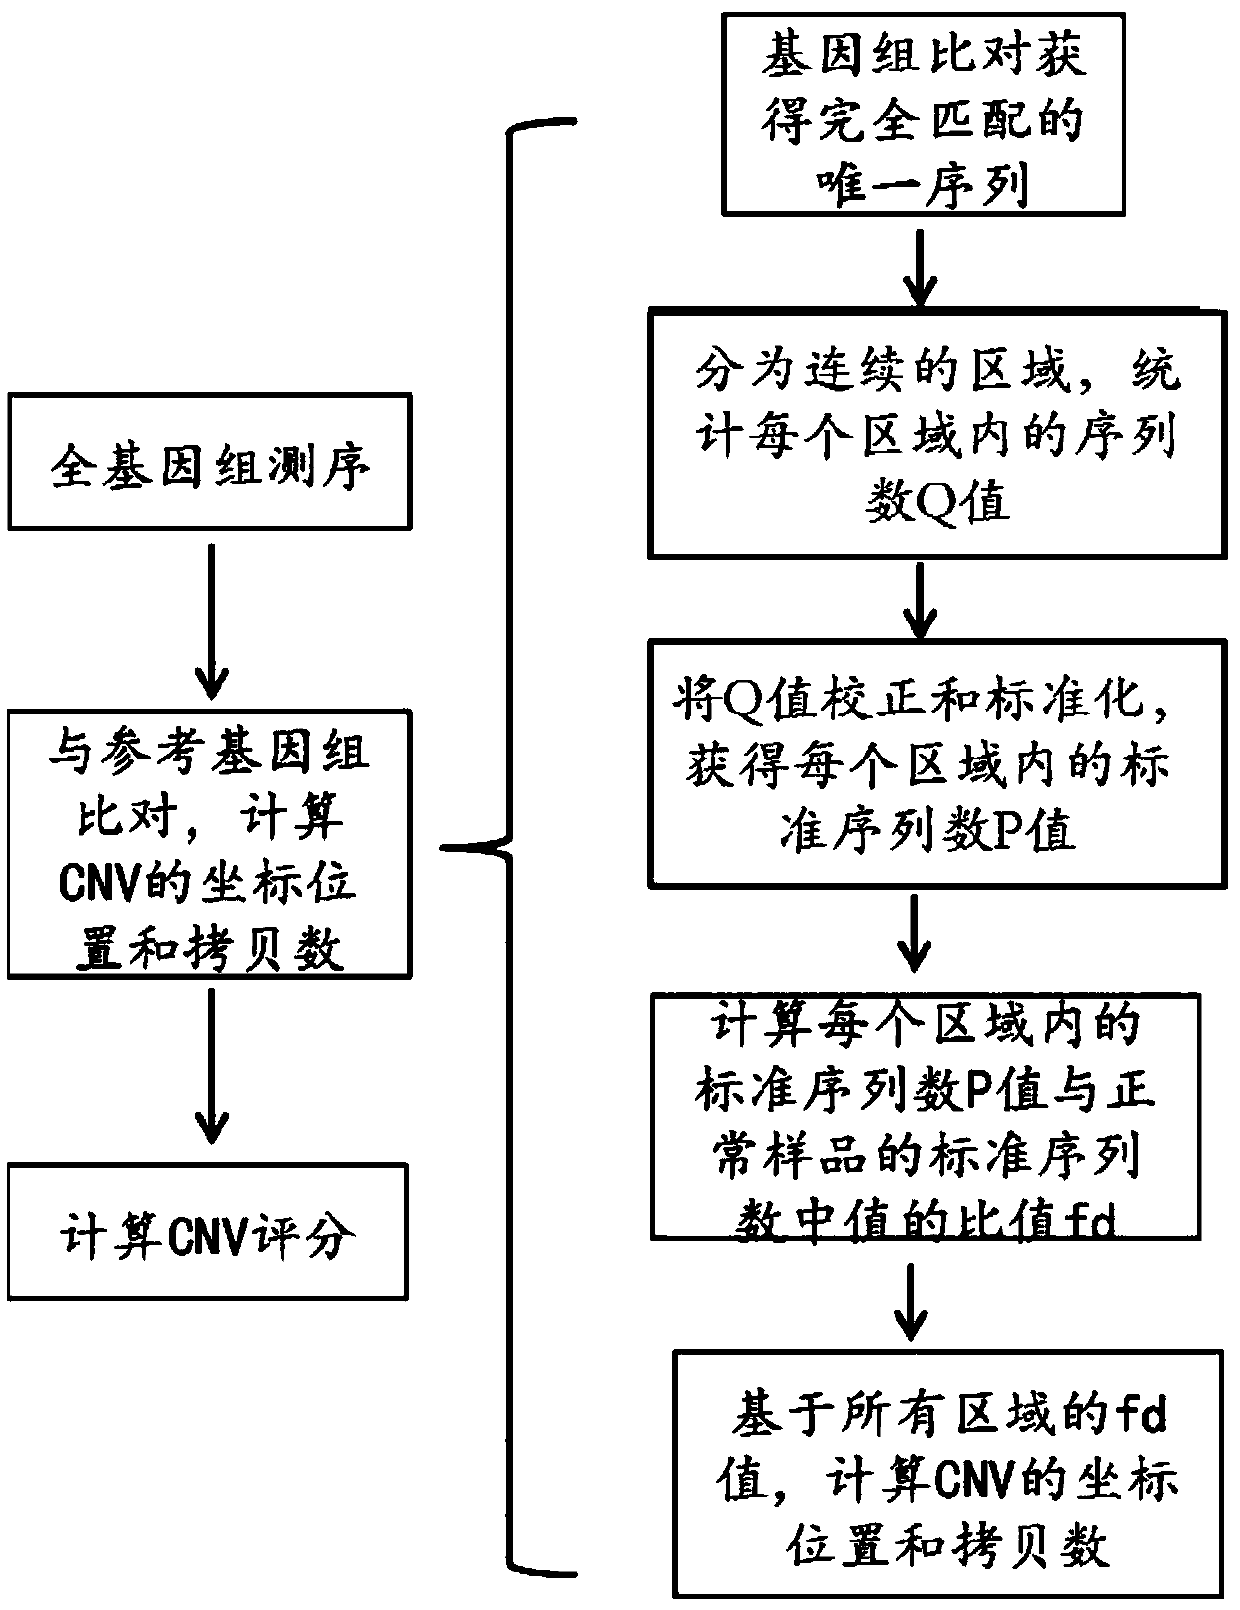 Detection method of whole genome copy number variation and application of the method